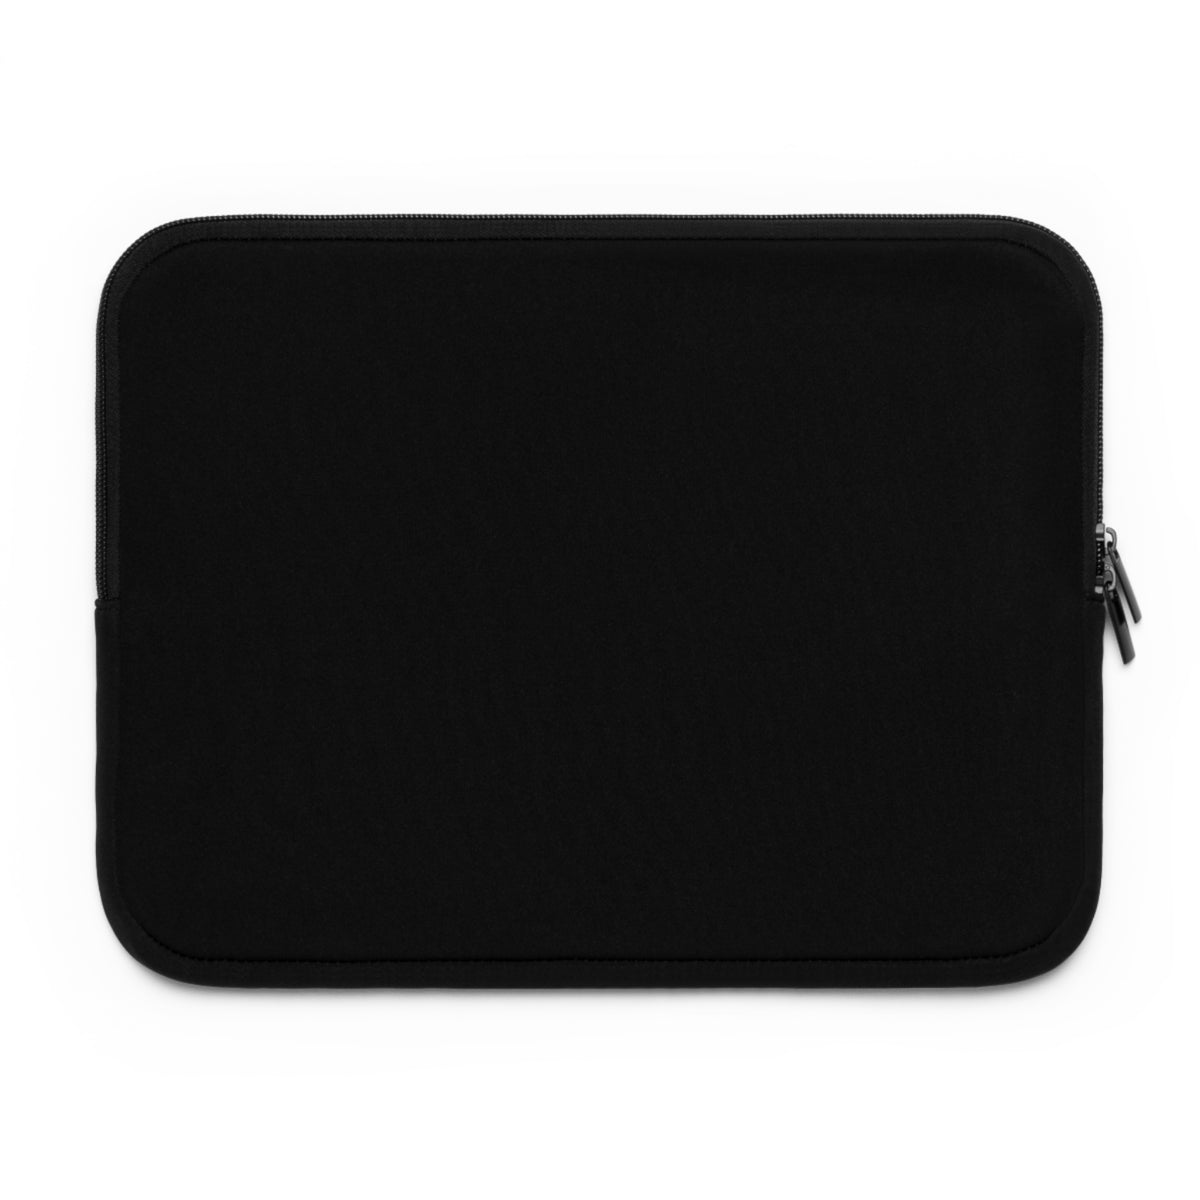 No Greater Love Laptop Sleeve